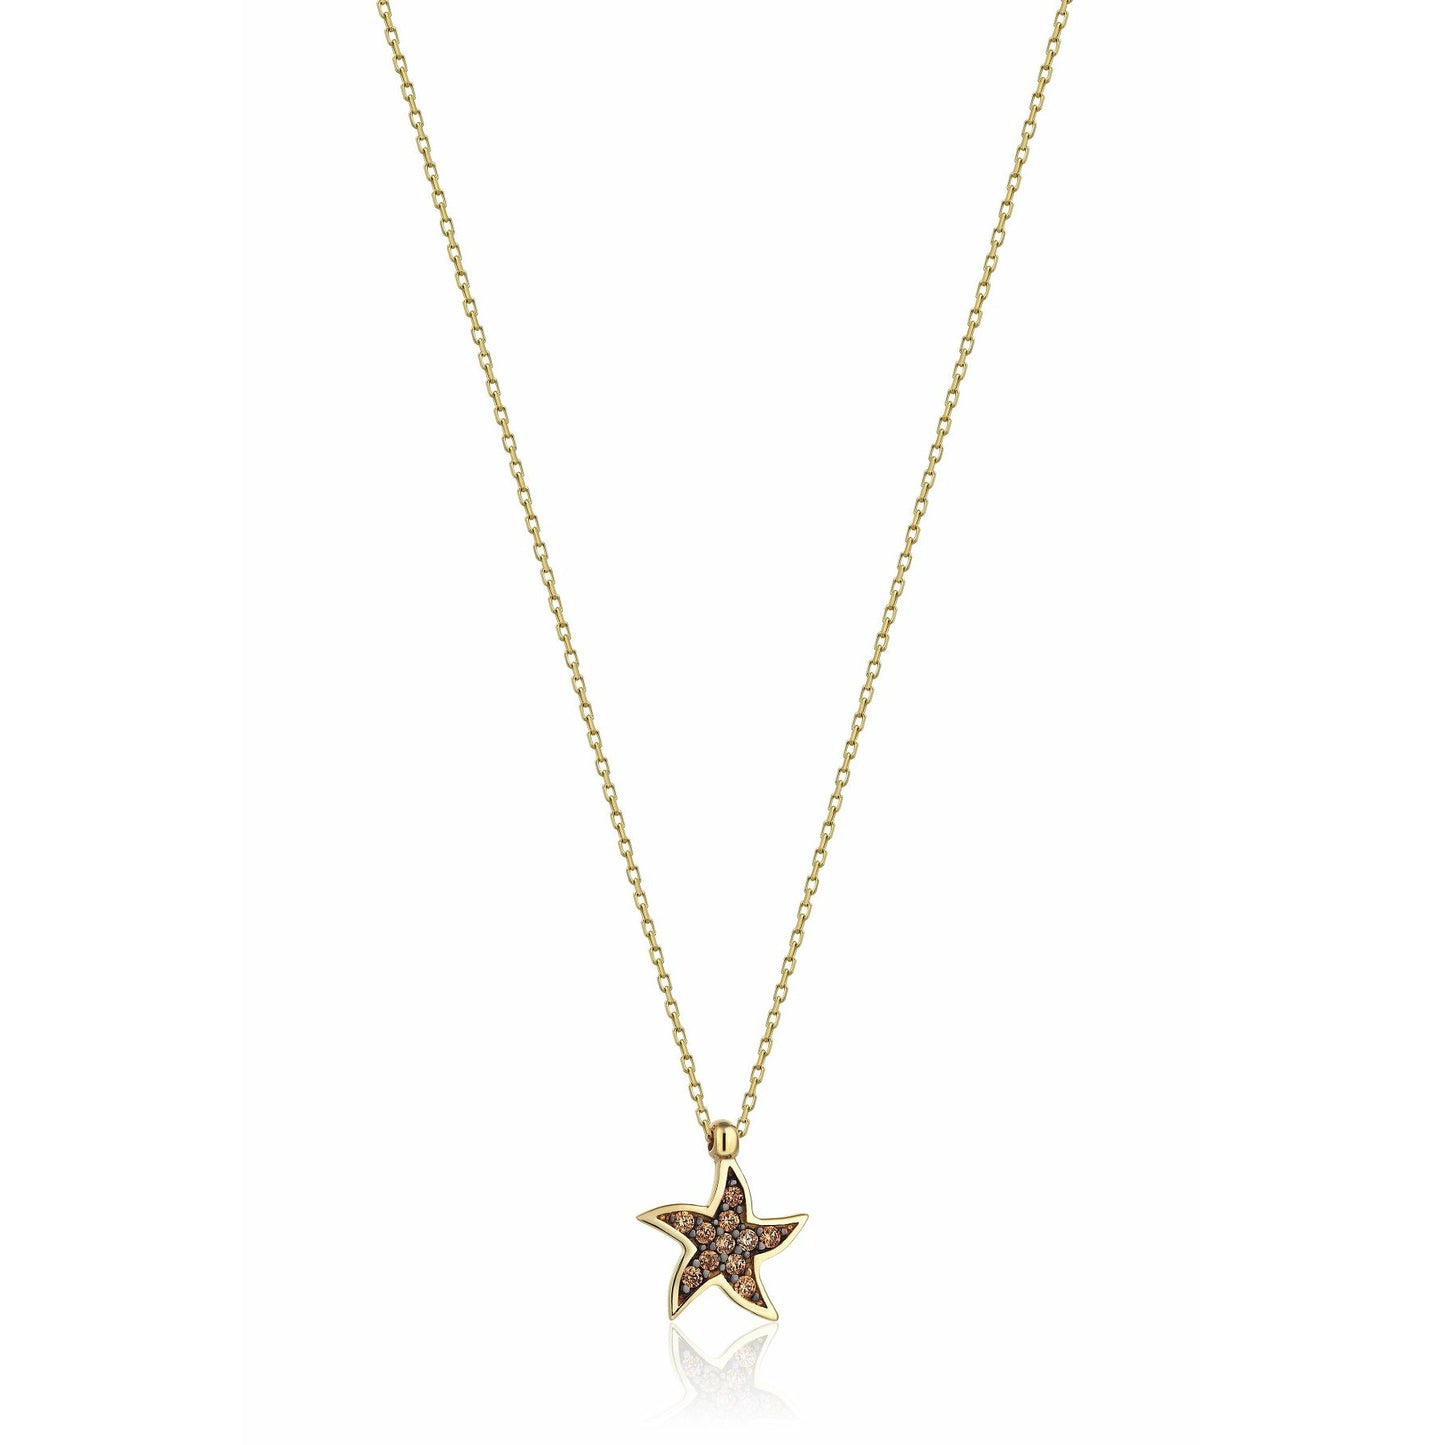 Gift 14K Gold Starfish Necklace